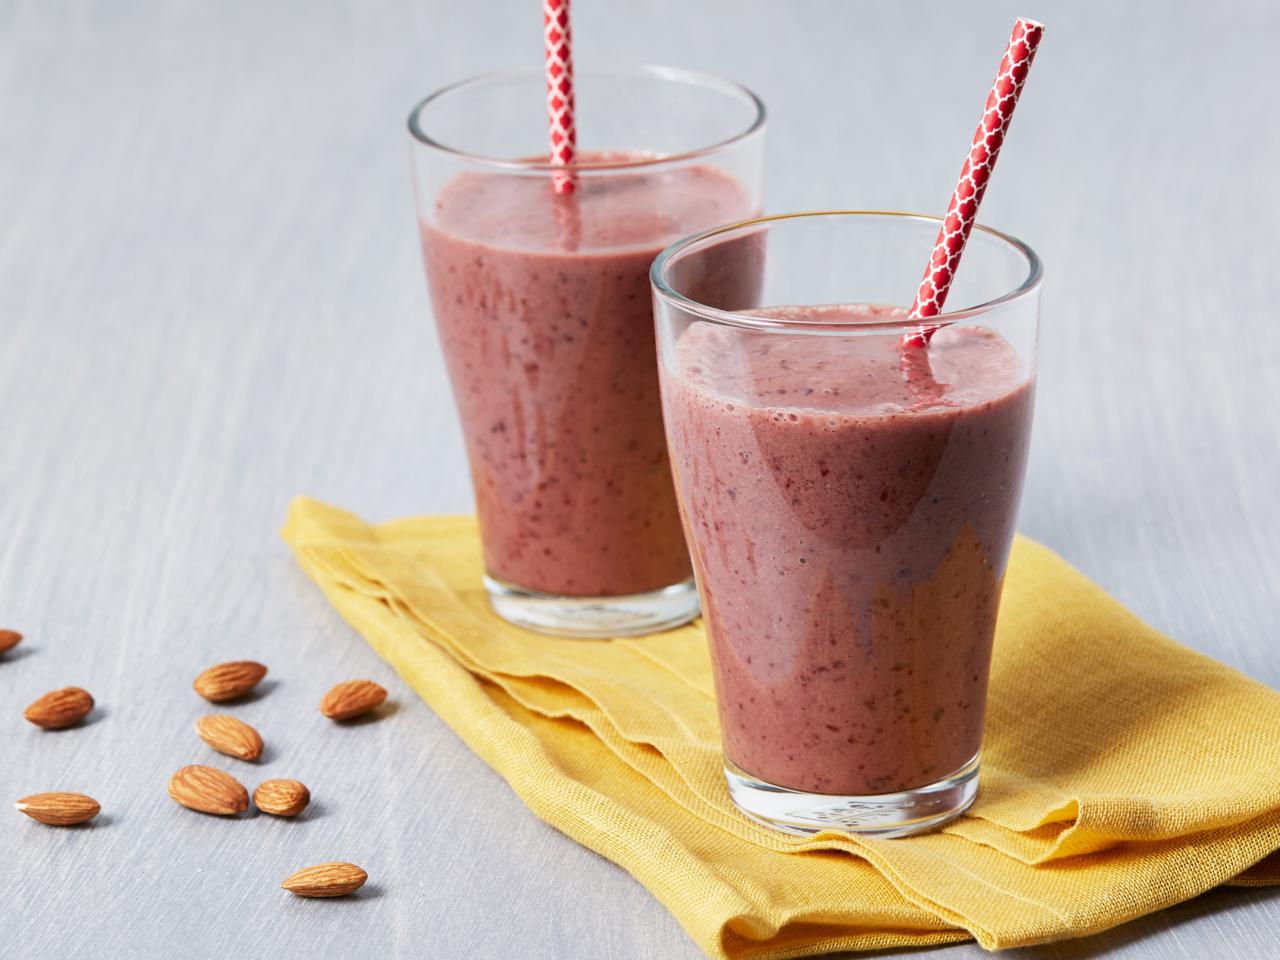 50+ BEST Fruit Smoothie Recipes - Great for Breakfast on the Go!